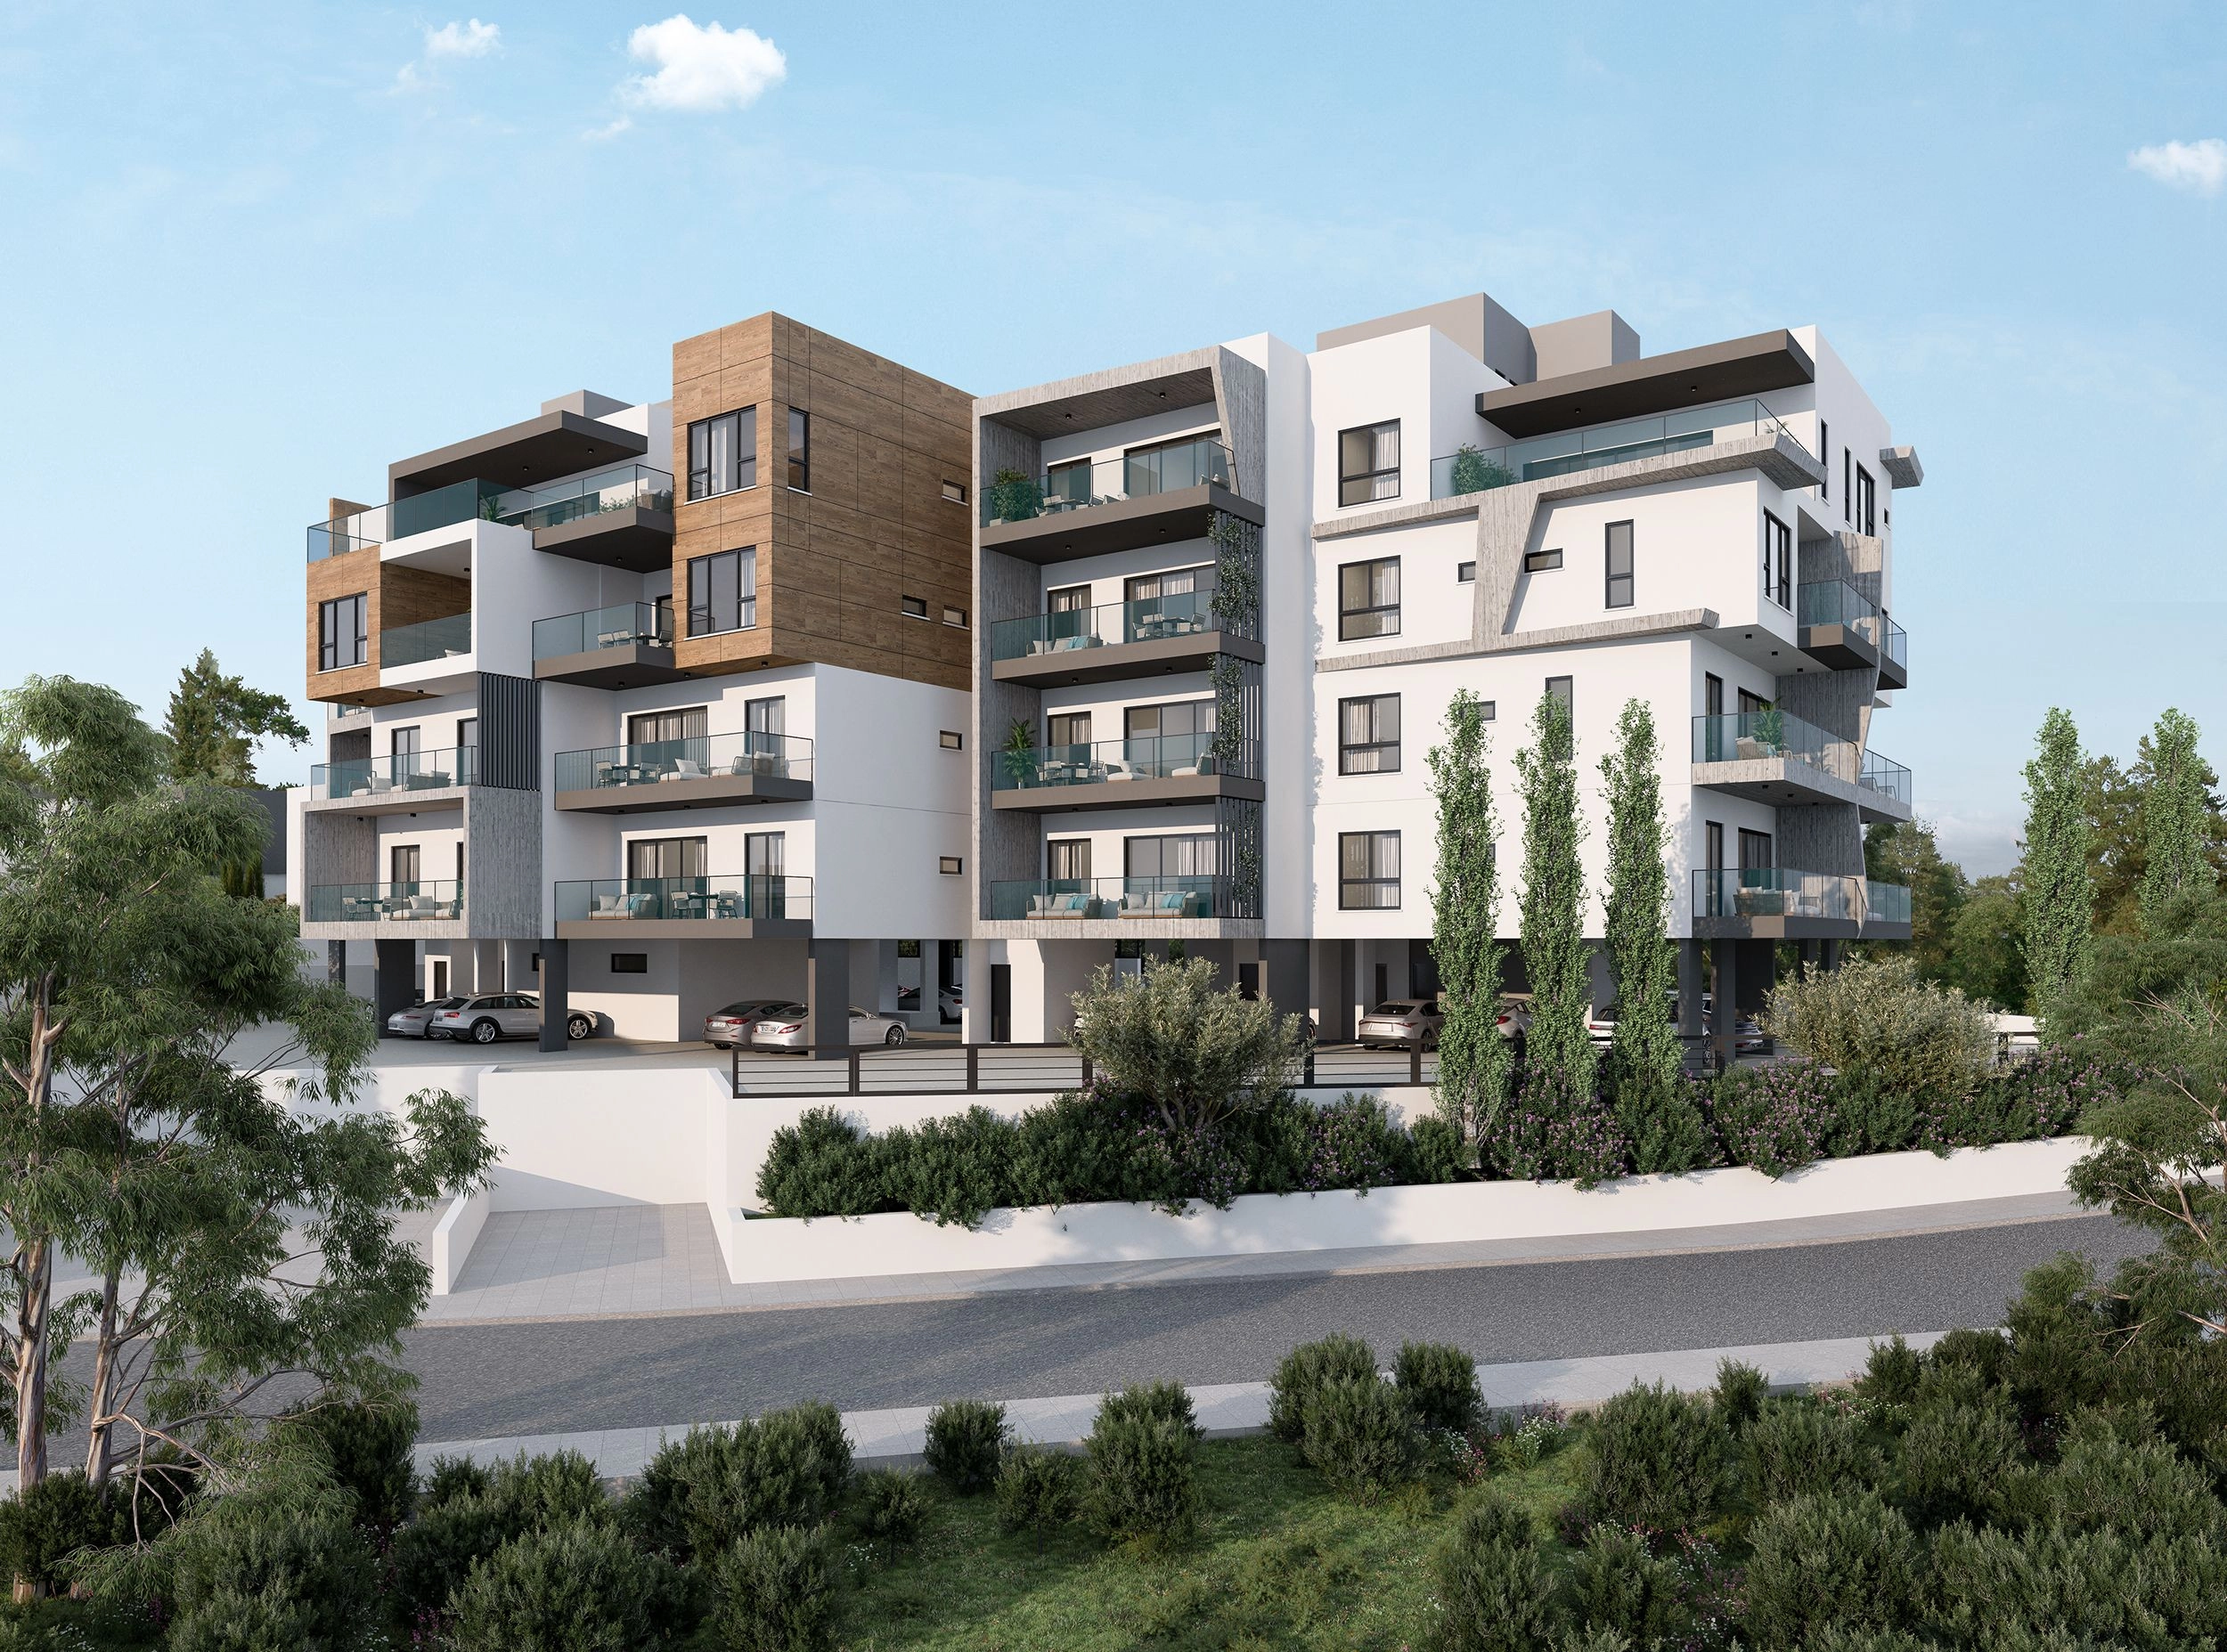 3 Bedroom Apartment for Sale in Limassol – Αgios Athanasios